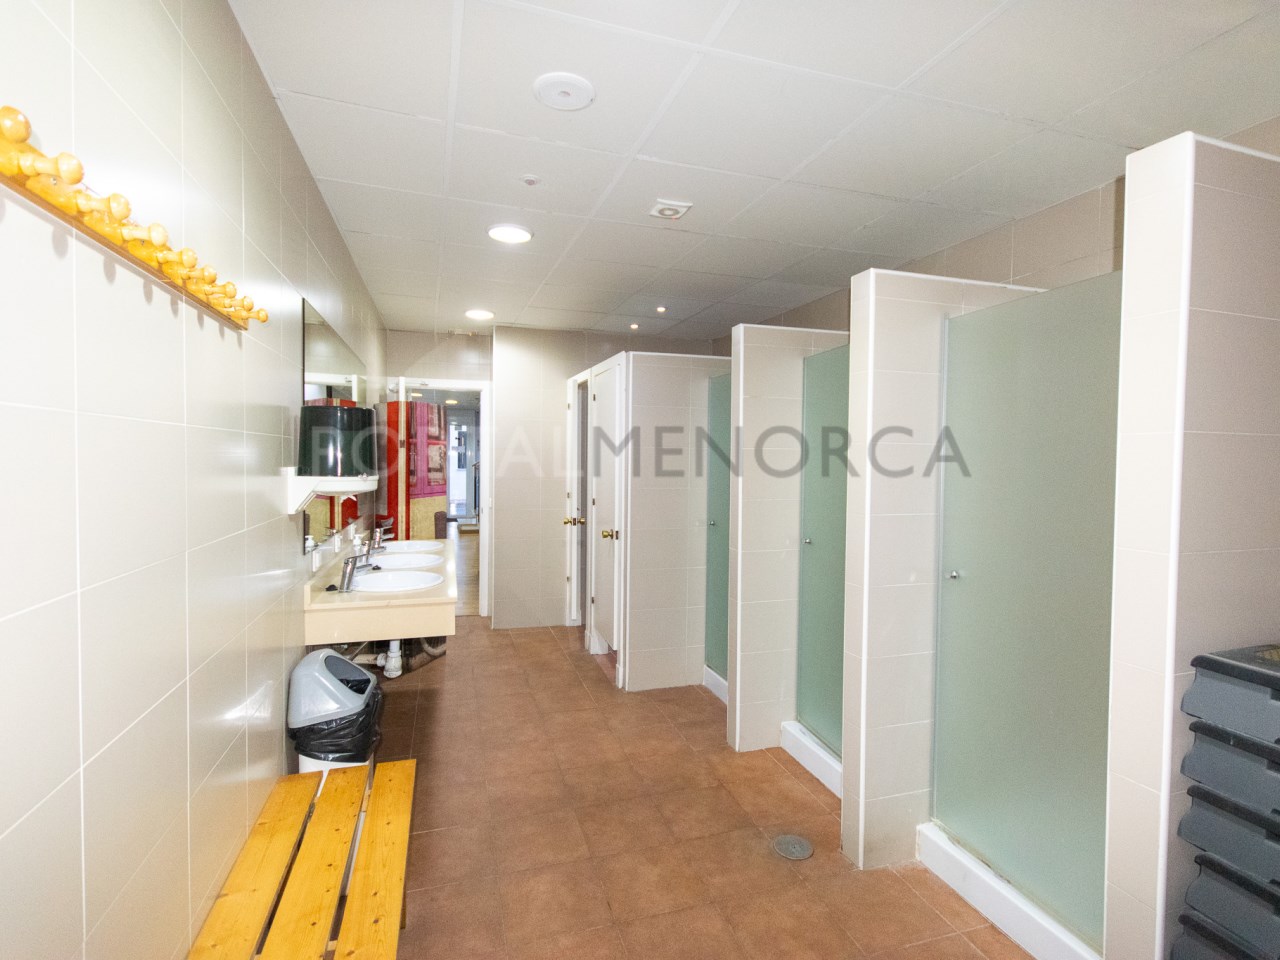 Changing rooms in a building for sale in the village of Sant Lluis